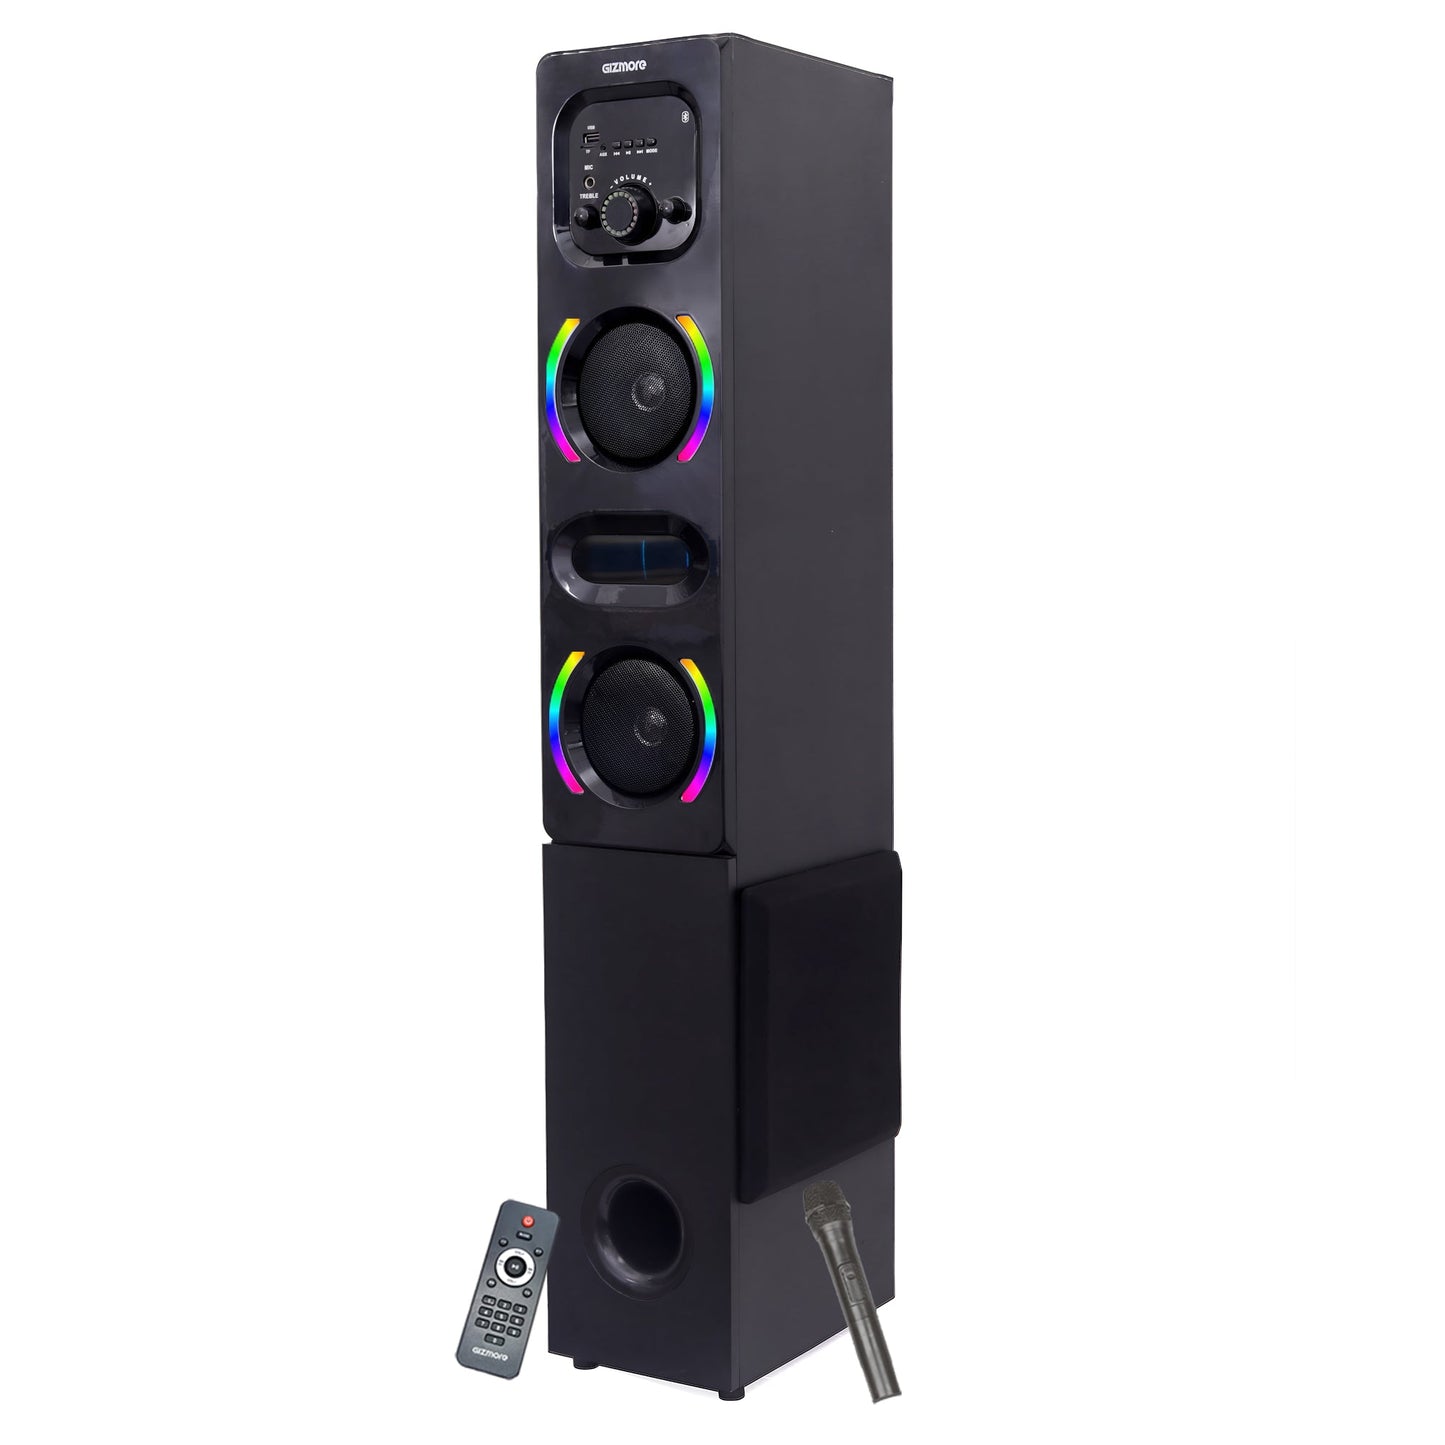 GIZMORE ST9000 100W DJ Tower Speaker  Digital LED Display  RGB Lights  Wireless MIC  Volume  Bass Control  Karaoke and Party Speaker with Multiple Connectivity